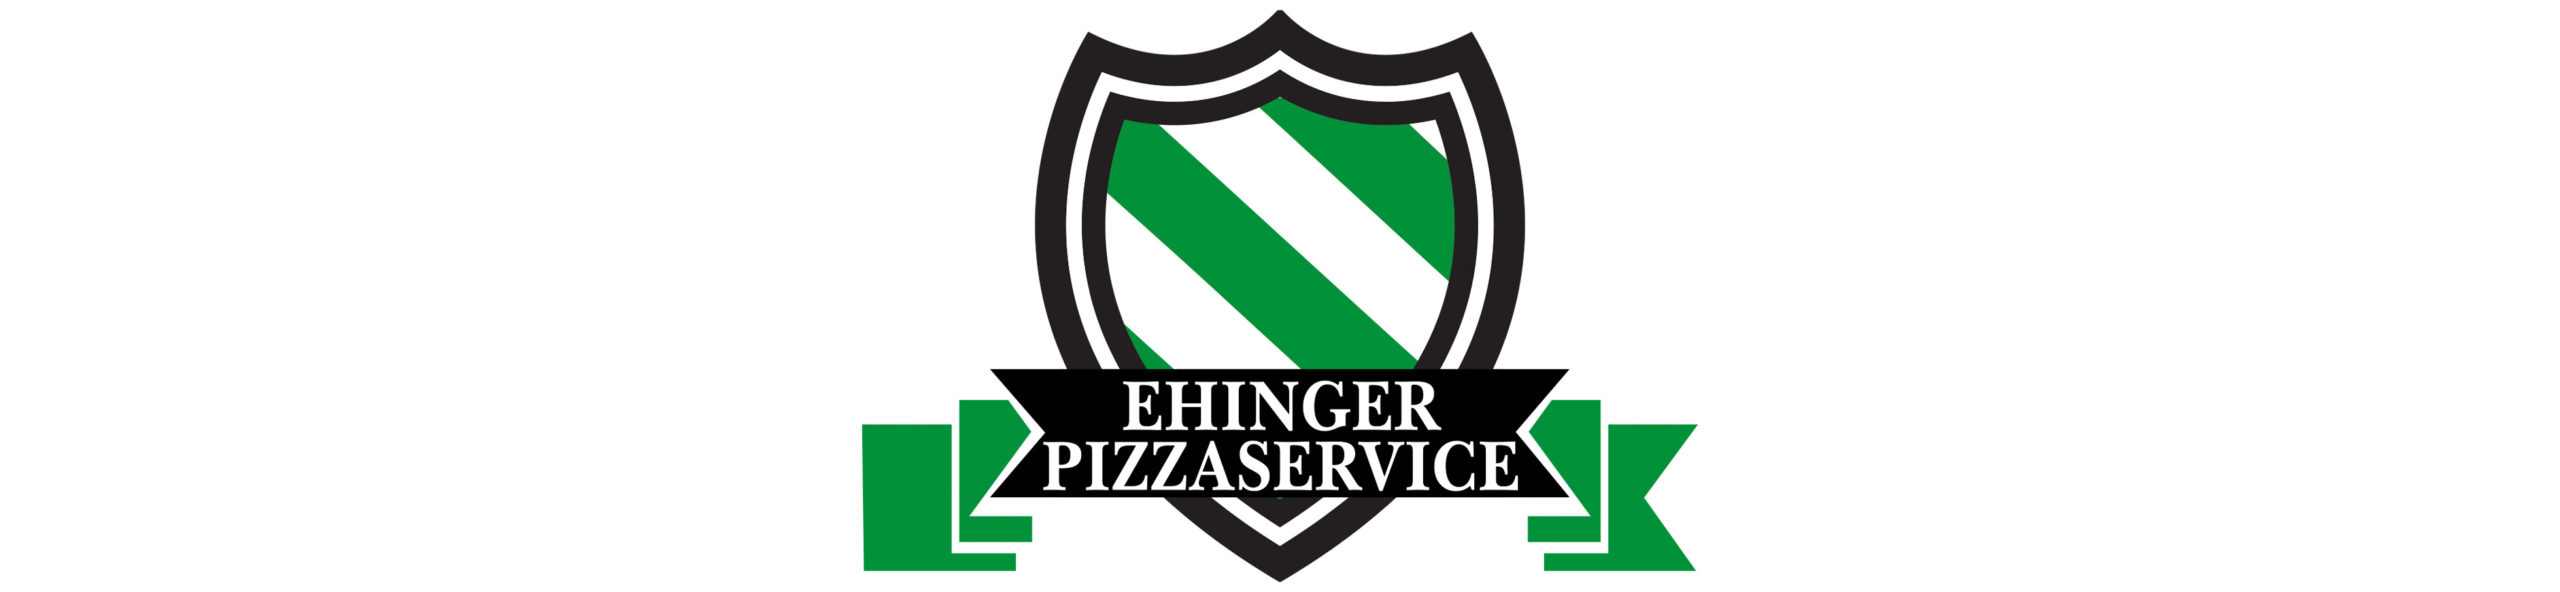 Ehinger Pizzaservice